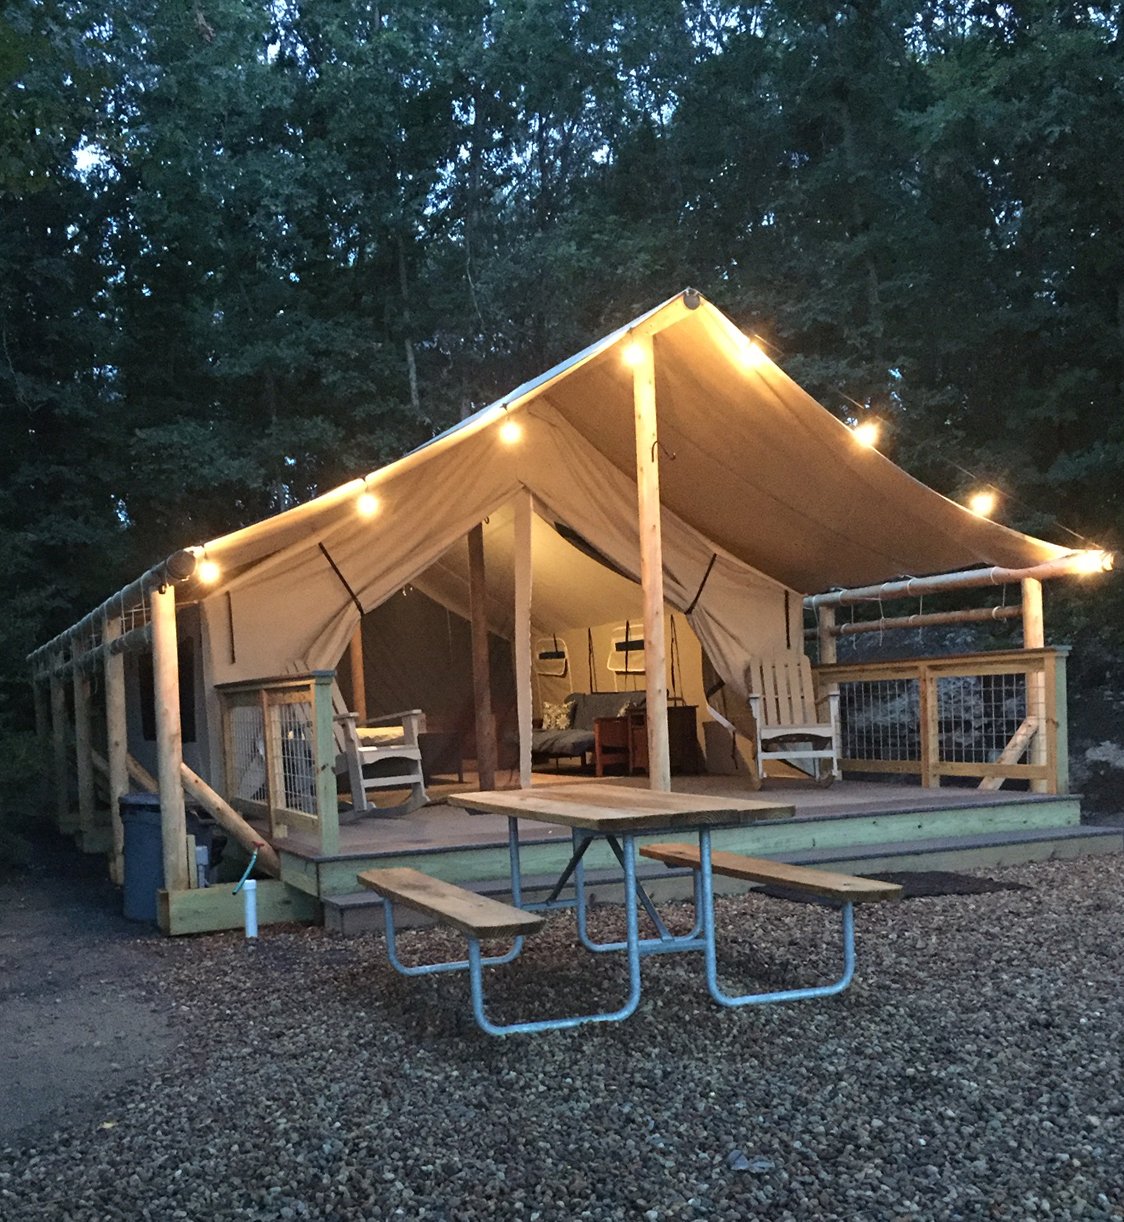 Normandy Farms Family Camping Resort